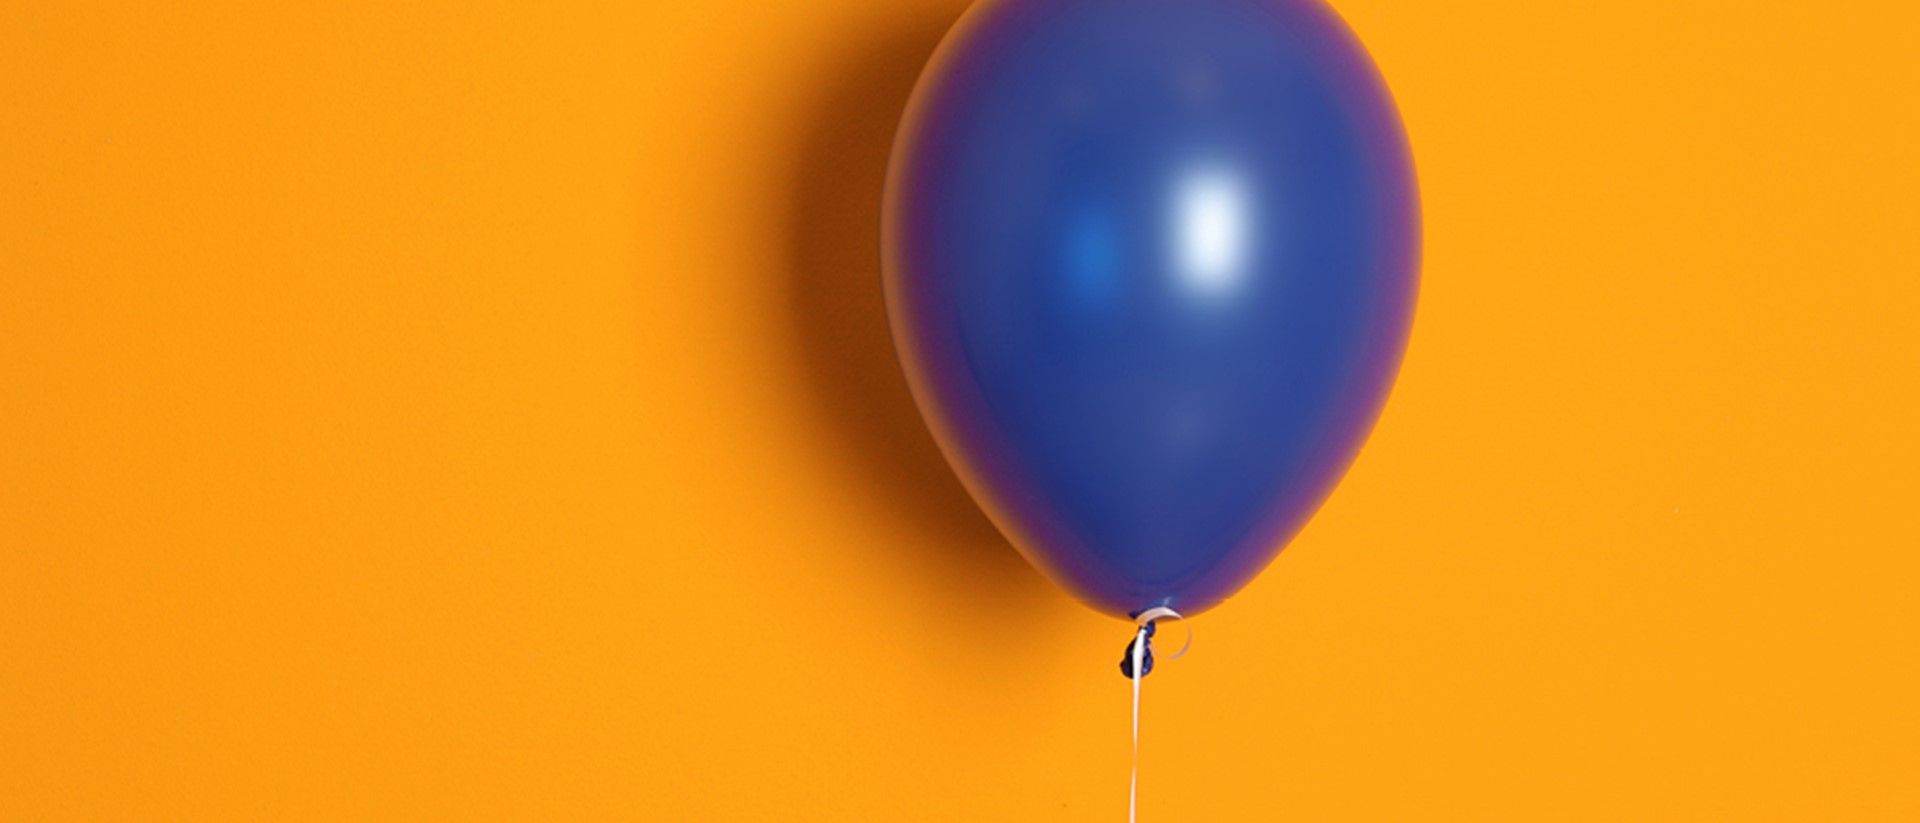 Image of a blue balloon on an orange background